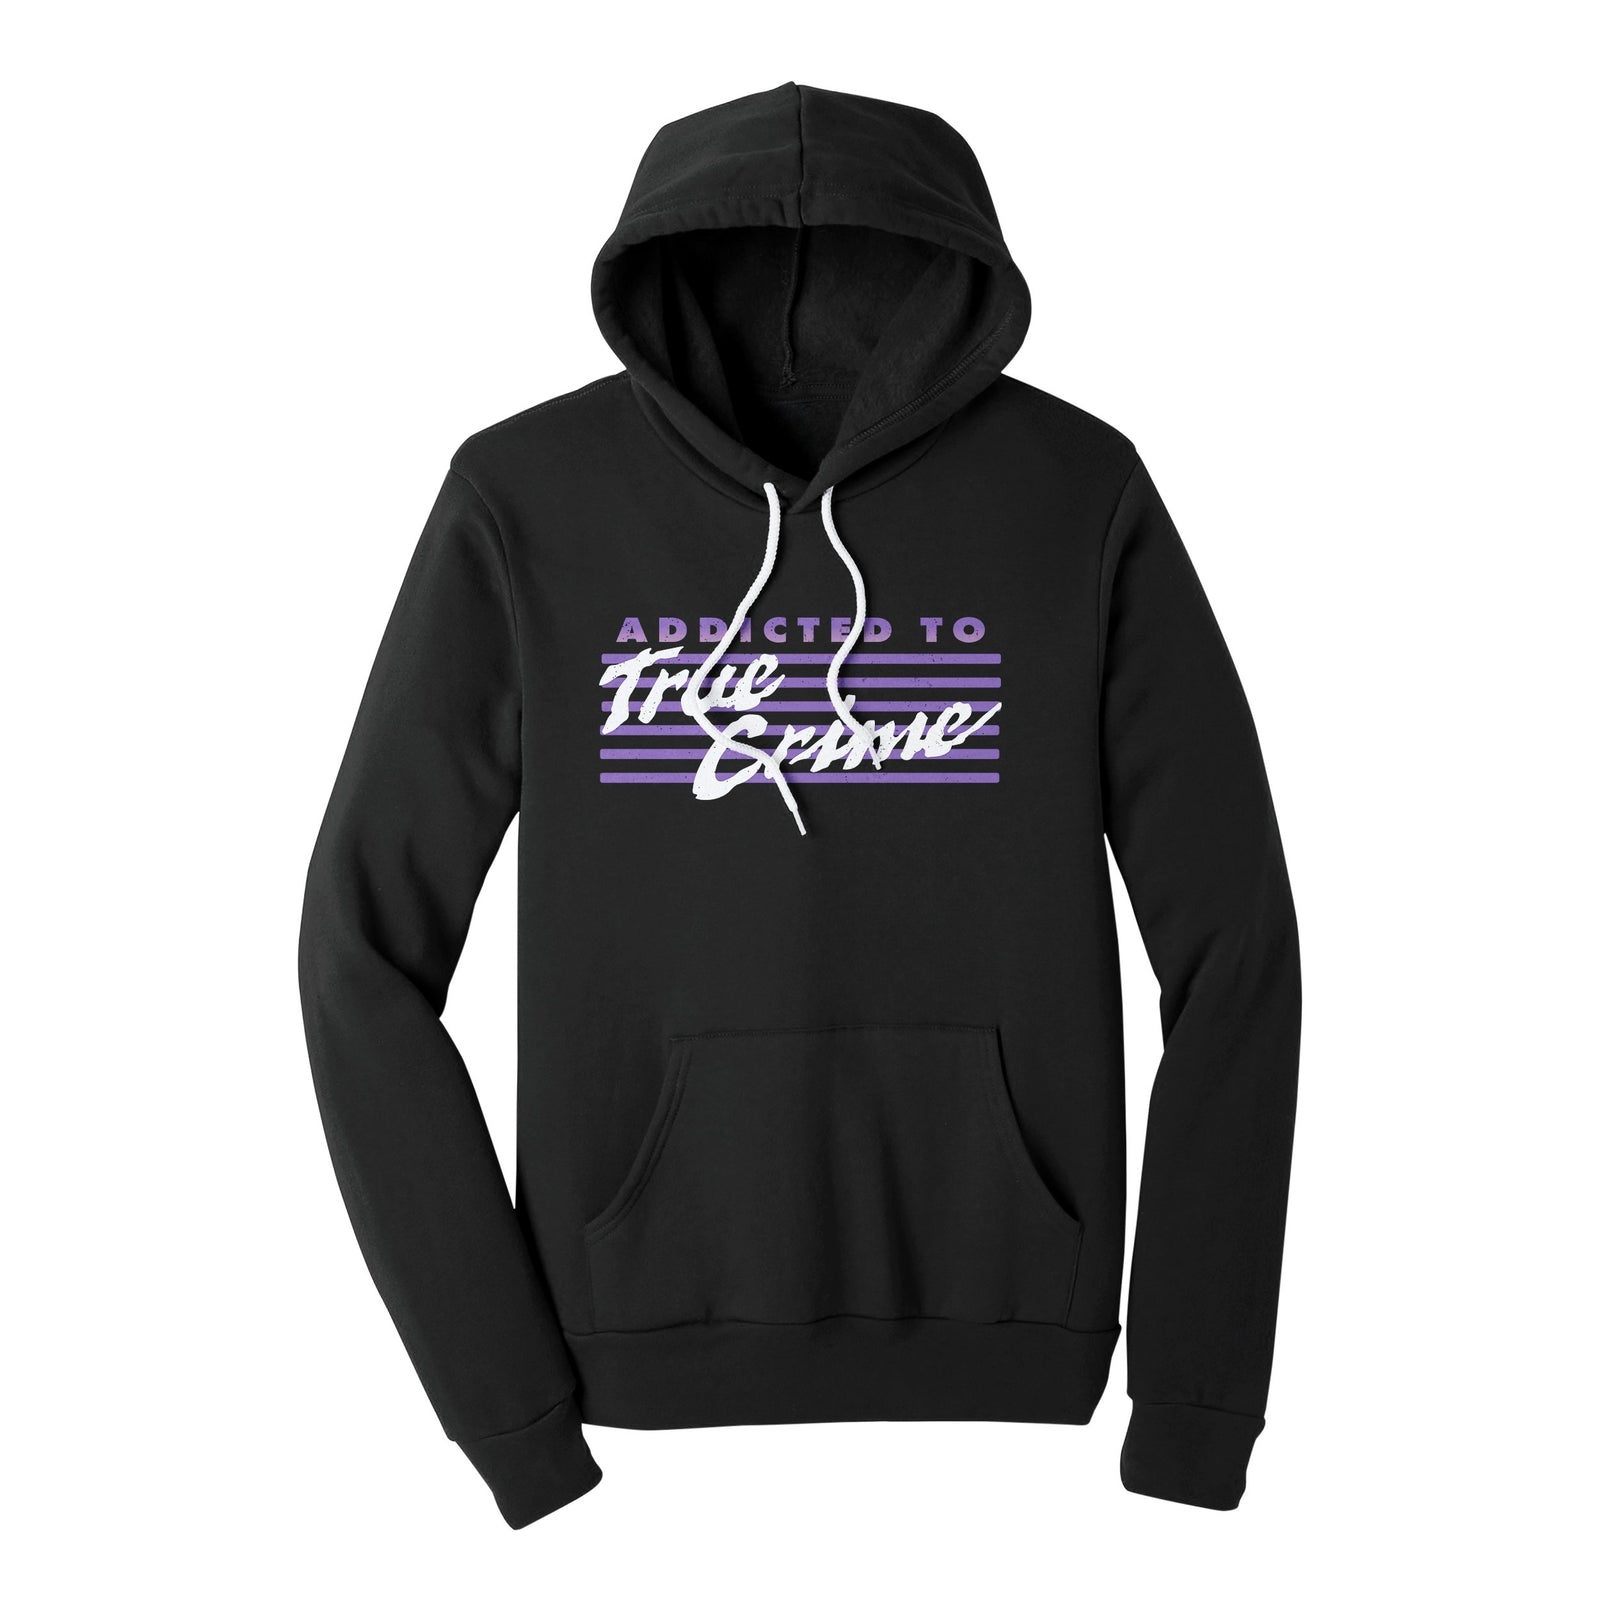 //cdn.shopify.com/s/files/1/0274/2488/2766/products/addicted-to-true-crime-hoodie-479454_5000x.jpg?v=1675242251 5000w,
    //cdn.shopify.com/s/files/1/0274/2488/2766/products/addicted-to-true-crime-hoodie-479454_4500x.jpg?v=1675242251 4500w,
    //cdn.shopify.com/s/files/1/0274/2488/2766/products/addicted-to-true-crime-hoodie-479454_4000x.jpg?v=1675242251 4000w,
    //cdn.shopify.com/s/files/1/0274/2488/2766/products/addicted-to-true-crime-hoodie-479454_3500x.jpg?v=1675242251 3500w,
    //cdn.shopify.com/s/files/1/0274/2488/2766/products/addicted-to-true-crime-hoodie-479454_3000x.jpg?v=1675242251 3000w,
    //cdn.shopify.com/s/files/1/0274/2488/2766/products/addicted-to-true-crime-hoodie-479454_2500x.jpg?v=1675242251 2500w,
    //cdn.shopify.com/s/files/1/0274/2488/2766/products/addicted-to-true-crime-hoodie-479454_2000x.jpg?v=1675242251 2000w,
    //cdn.shopify.com/s/files/1/0274/2488/2766/products/addicted-to-true-crime-hoodie-479454_1800x.jpg?v=1675242251 1800w,
    //cdn.shopify.com/s/files/1/0274/2488/2766/products/addicted-to-true-crime-hoodie-479454_1600x.jpg?v=1675242251 1600w,
    //cdn.shopify.com/s/files/1/0274/2488/2766/products/addicted-to-true-crime-hoodie-479454_1400x.jpg?v=1675242251 1400w,
    //cdn.shopify.com/s/files/1/0274/2488/2766/products/addicted-to-true-crime-hoodie-479454_1200x.jpg?v=1675242251 1200w,
    //cdn.shopify.com/s/files/1/0274/2488/2766/products/addicted-to-true-crime-hoodie-479454_1000x.jpg?v=1675242251 1000w,
    //cdn.shopify.com/s/files/1/0274/2488/2766/products/addicted-to-true-crime-hoodie-479454_800x.jpg?v=1675242251 800w,
    //cdn.shopify.com/s/files/1/0274/2488/2766/products/addicted-to-true-crime-hoodie-479454_600x.jpg?v=1675242251 600w,
    //cdn.shopify.com/s/files/1/0274/2488/2766/products/addicted-to-true-crime-hoodie-479454_400x.jpg?v=1675242251 400w,
    //cdn.shopify.com/s/files/1/0274/2488/2766/products/addicted-to-true-crime-hoodie-479454_200x.jpg?v=1675242251 200w